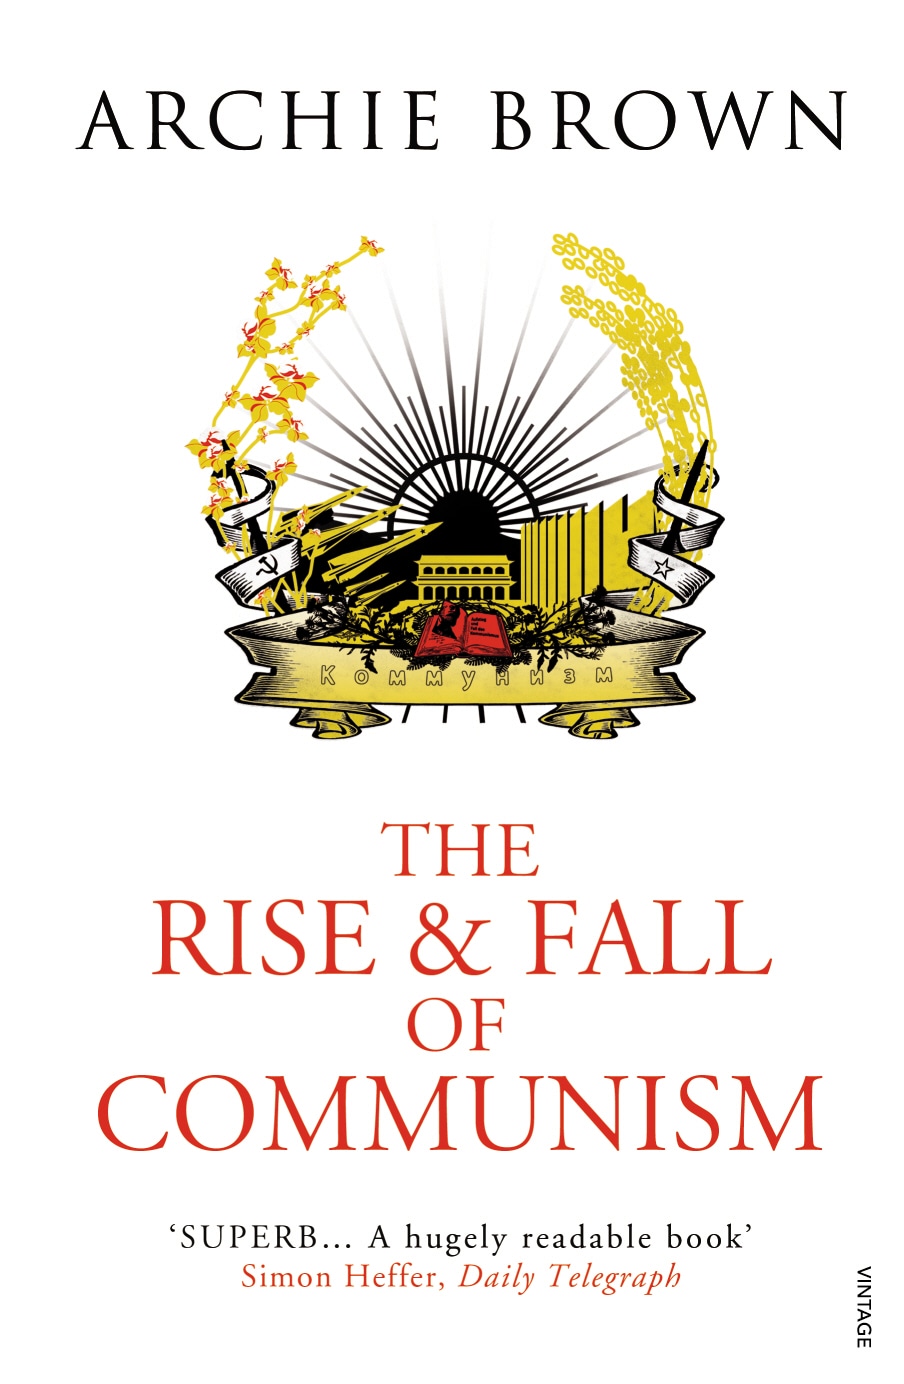 Book “The Rise and Fall of Communism” by Archie Brown